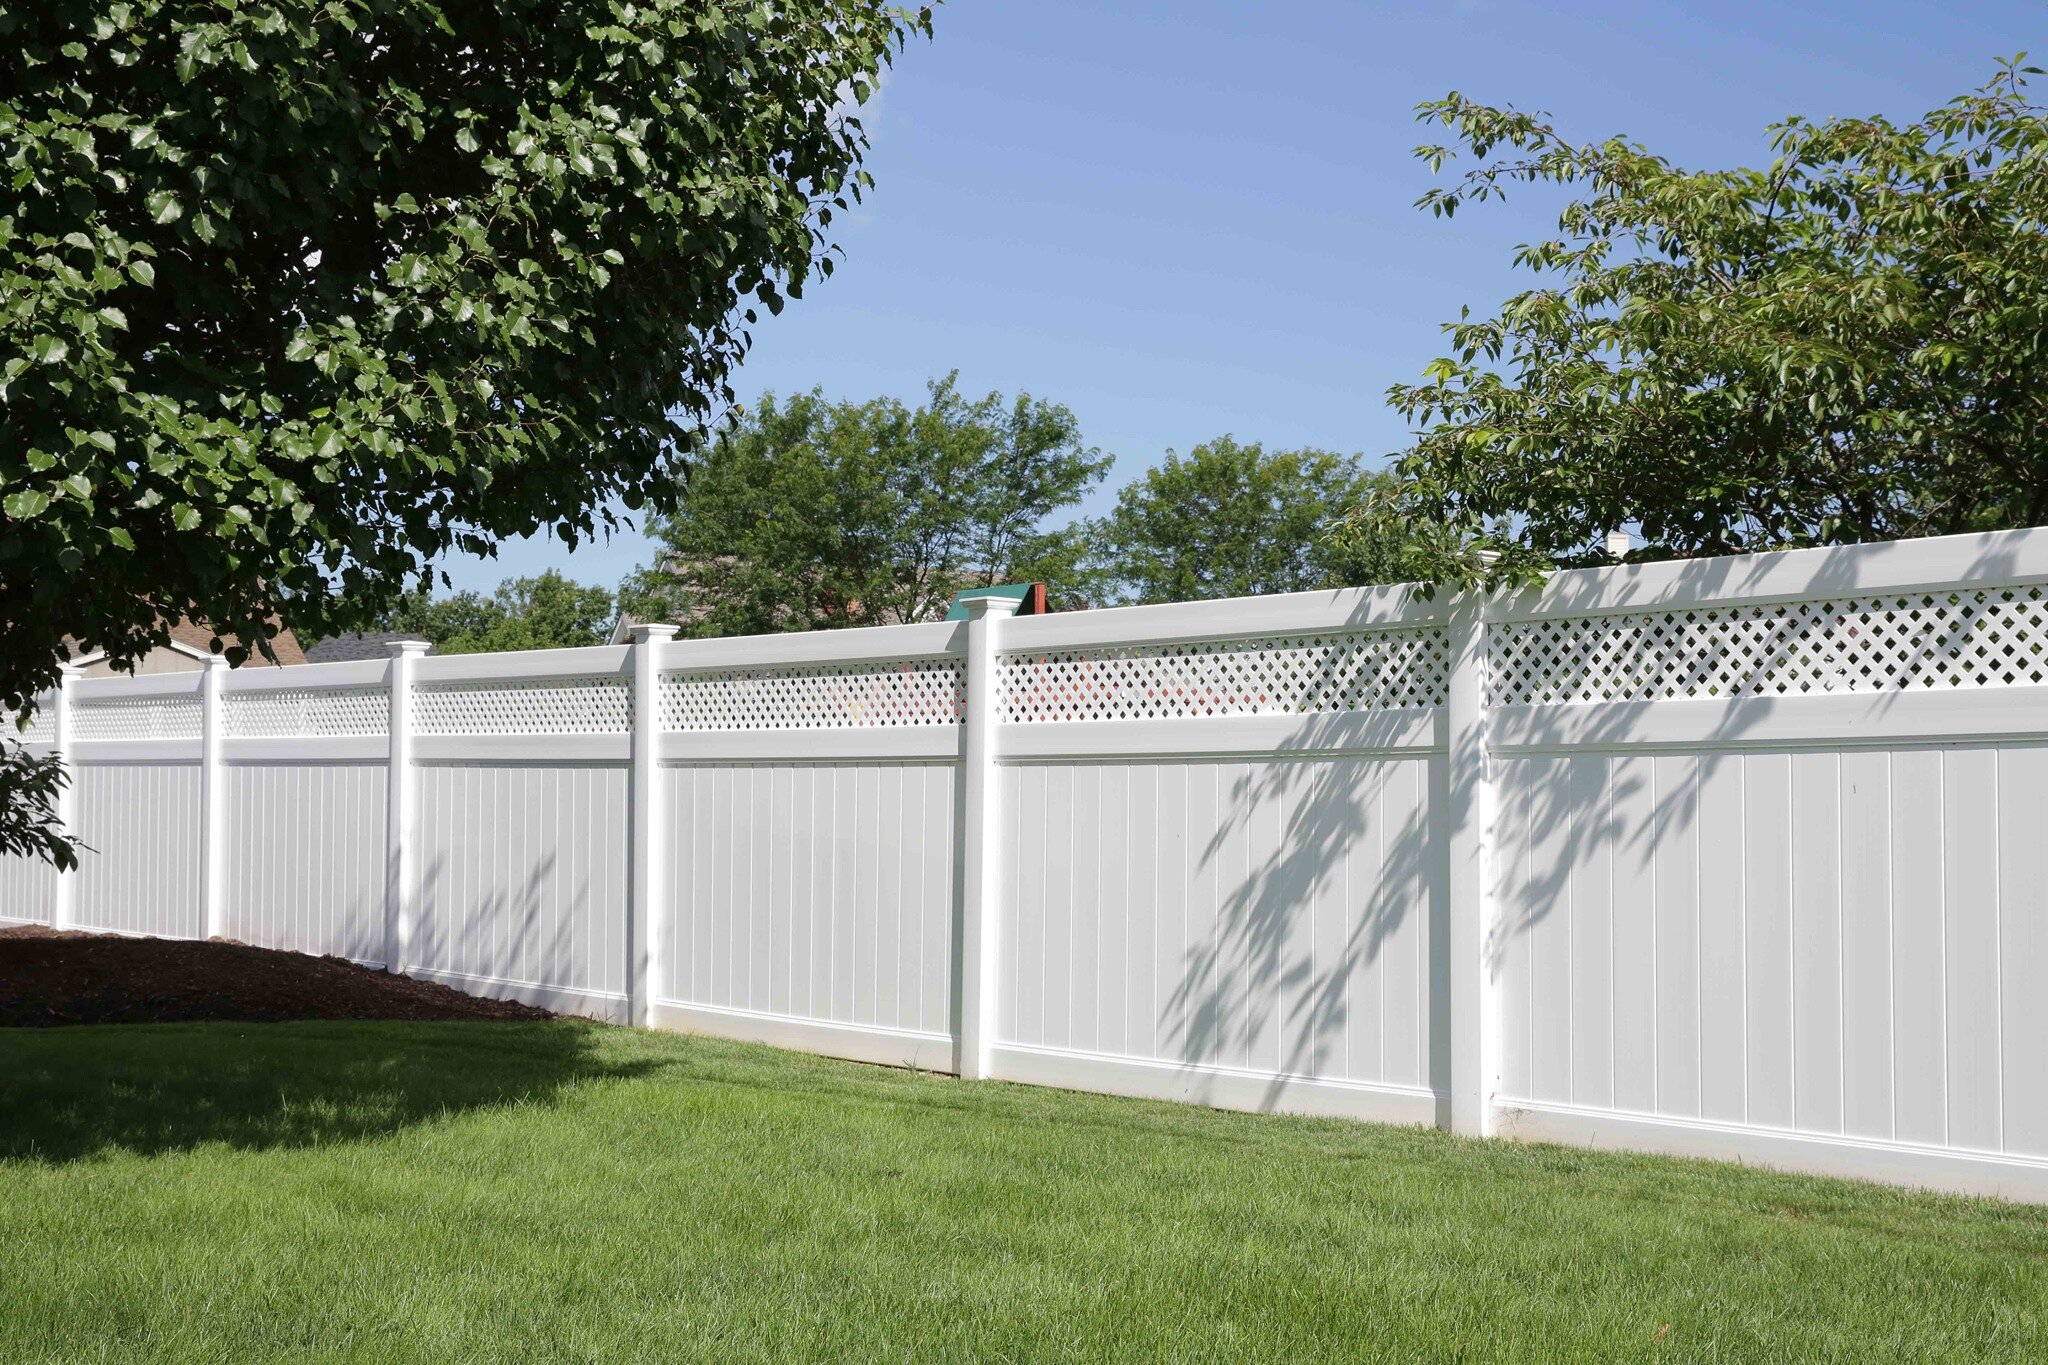 Fence Companies: Factors to Consider Before Making a Decision